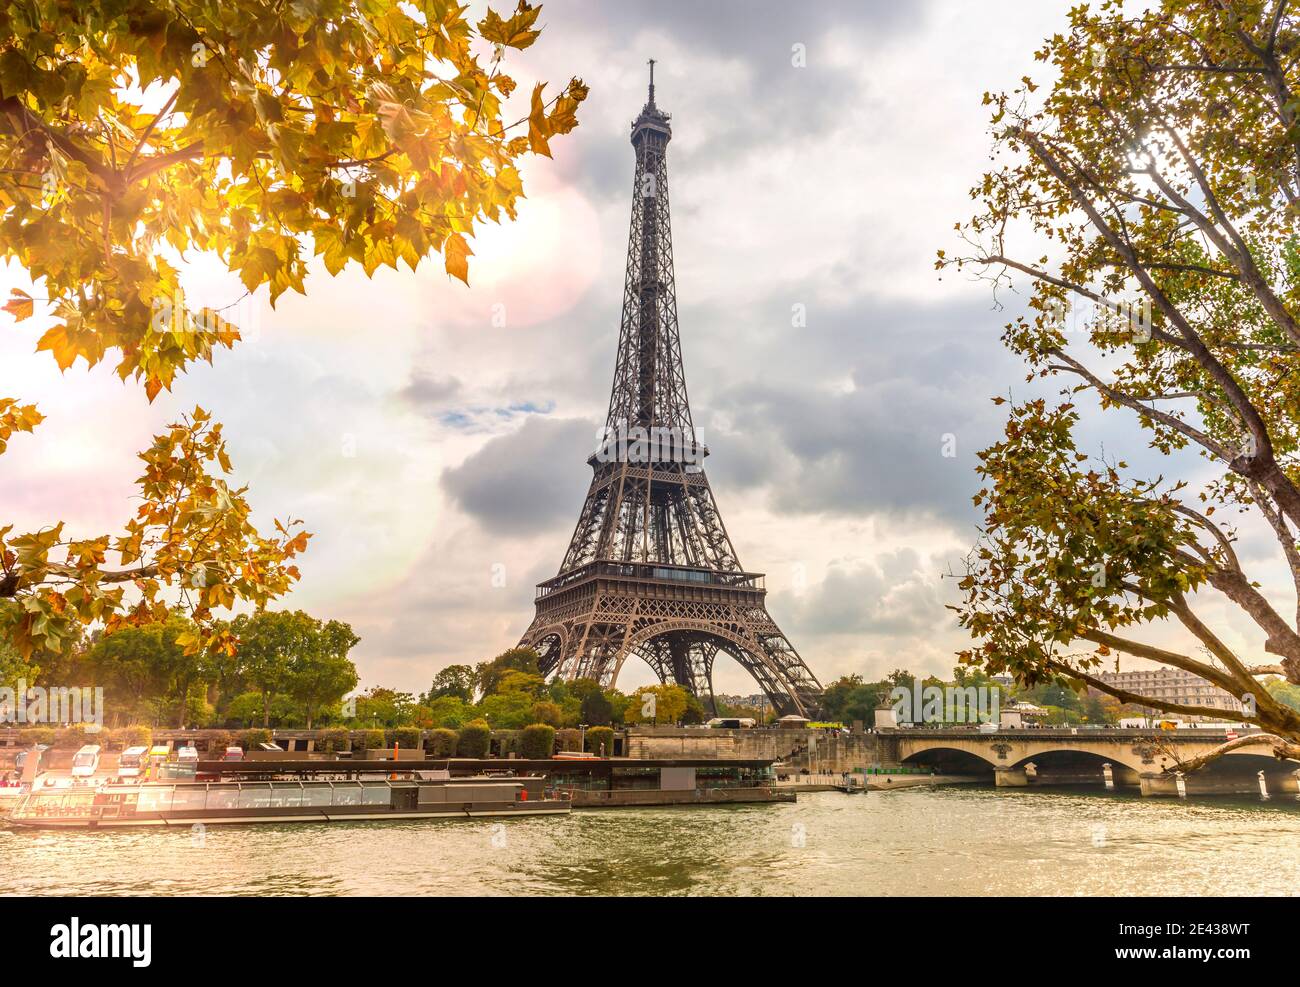 The Eiffel Tower on the banks of the Seine in autumn in Paris, France Stock Photo